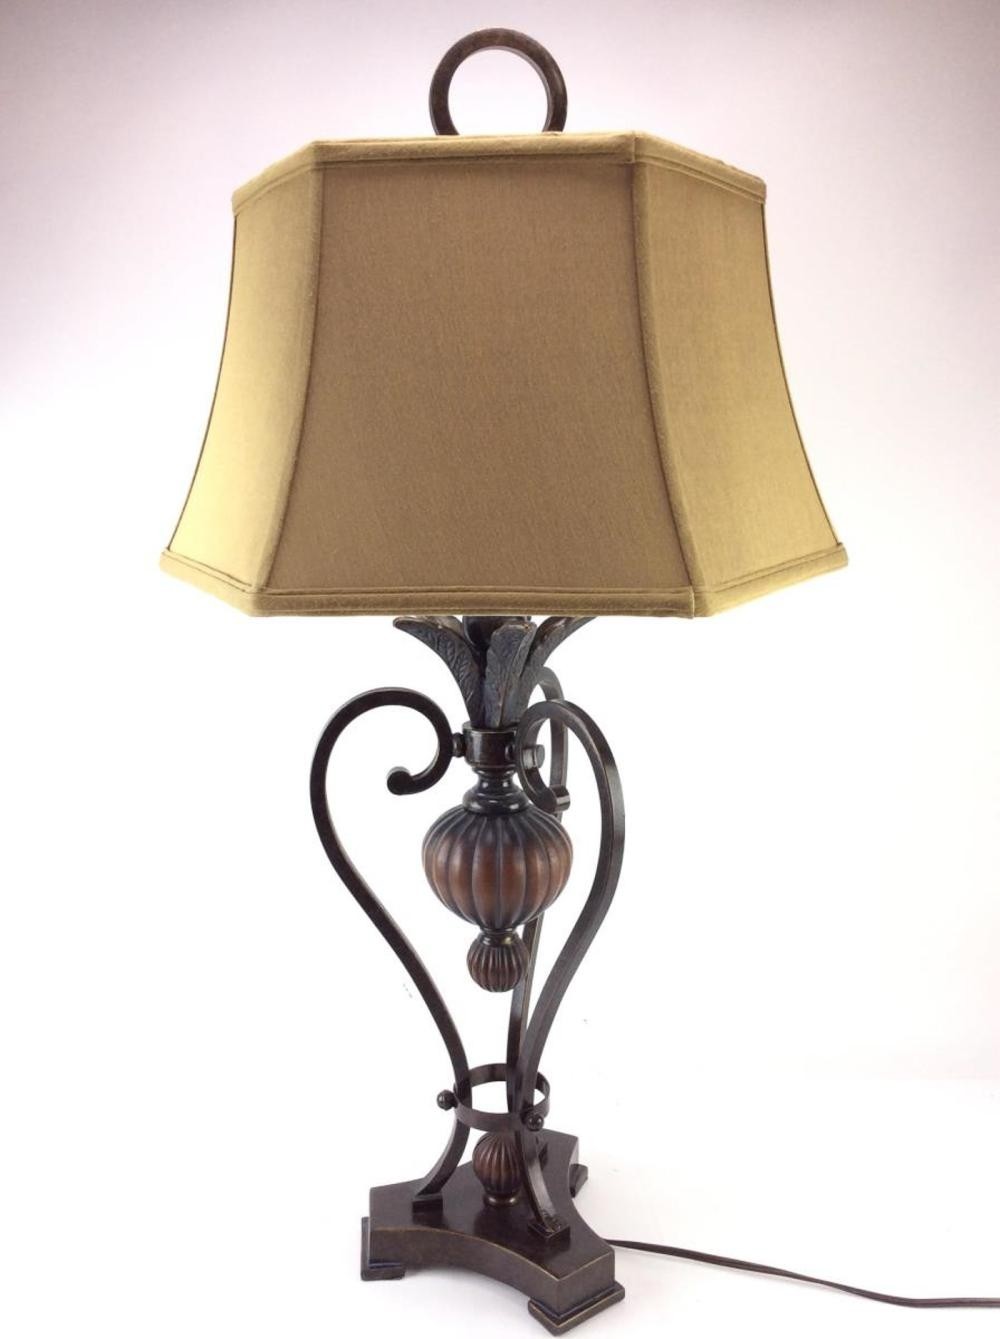 Contemporary tuscan style metal table lamp